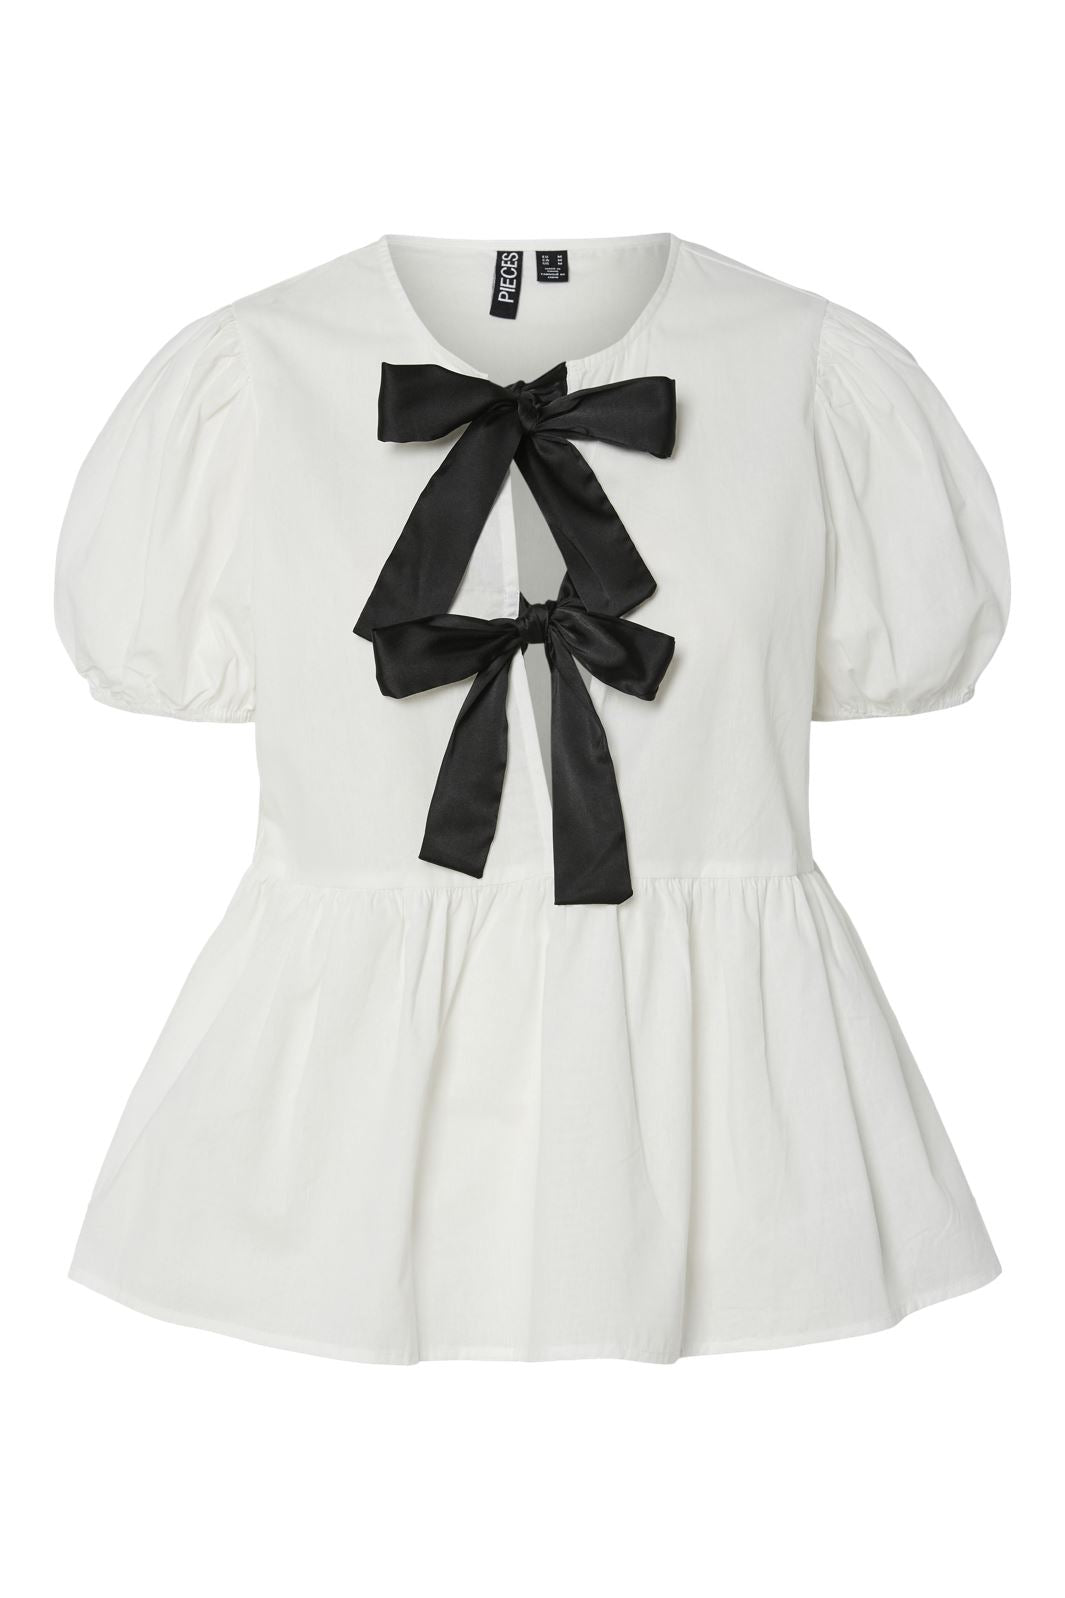 Pieces - Pcgolly Ss Bow Top - 4688609 Bright White Black Bow